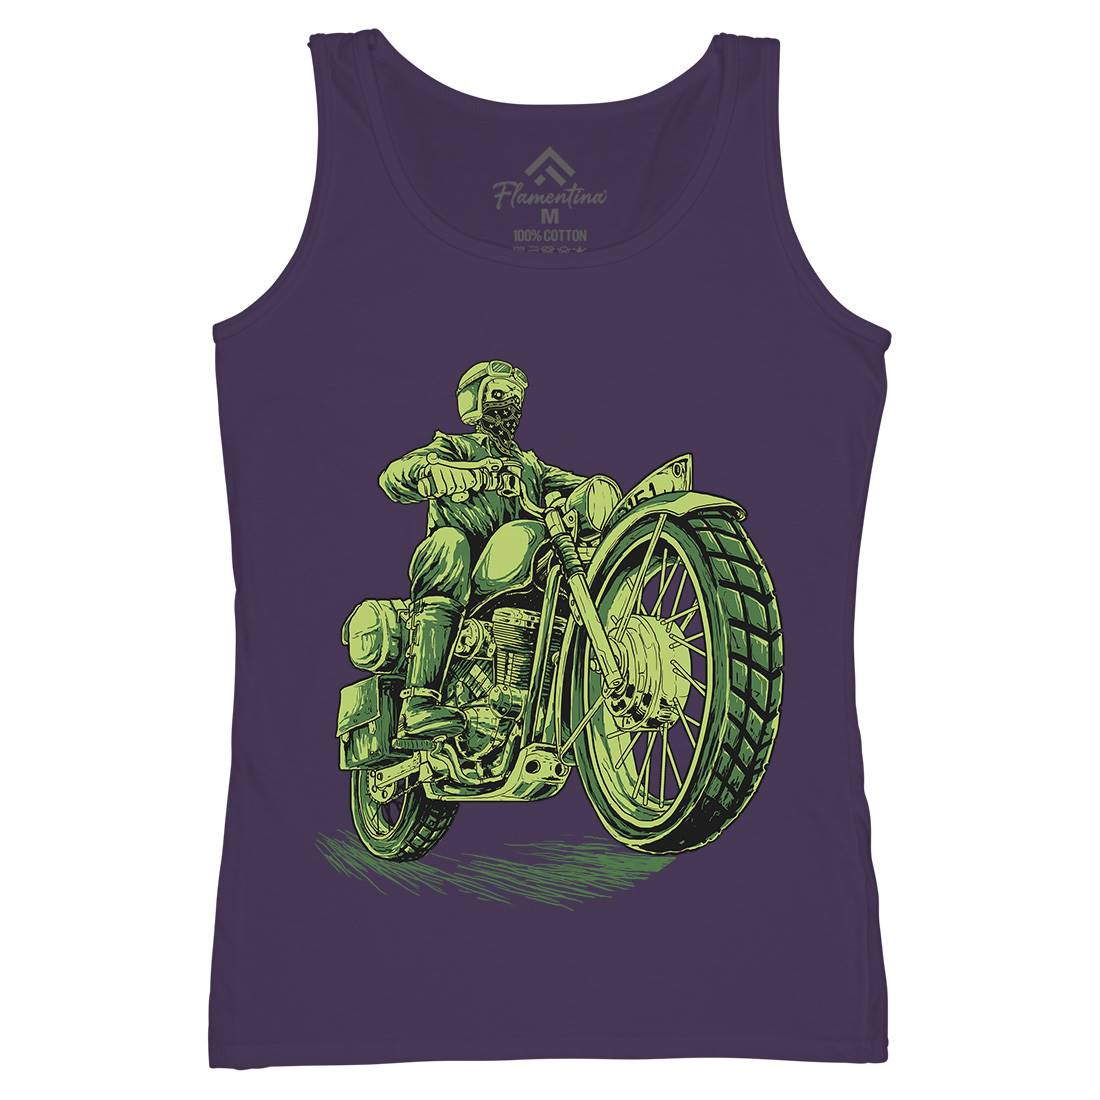 Cafe Racer Womens Organic Tank Top Vest Motorcycles D016